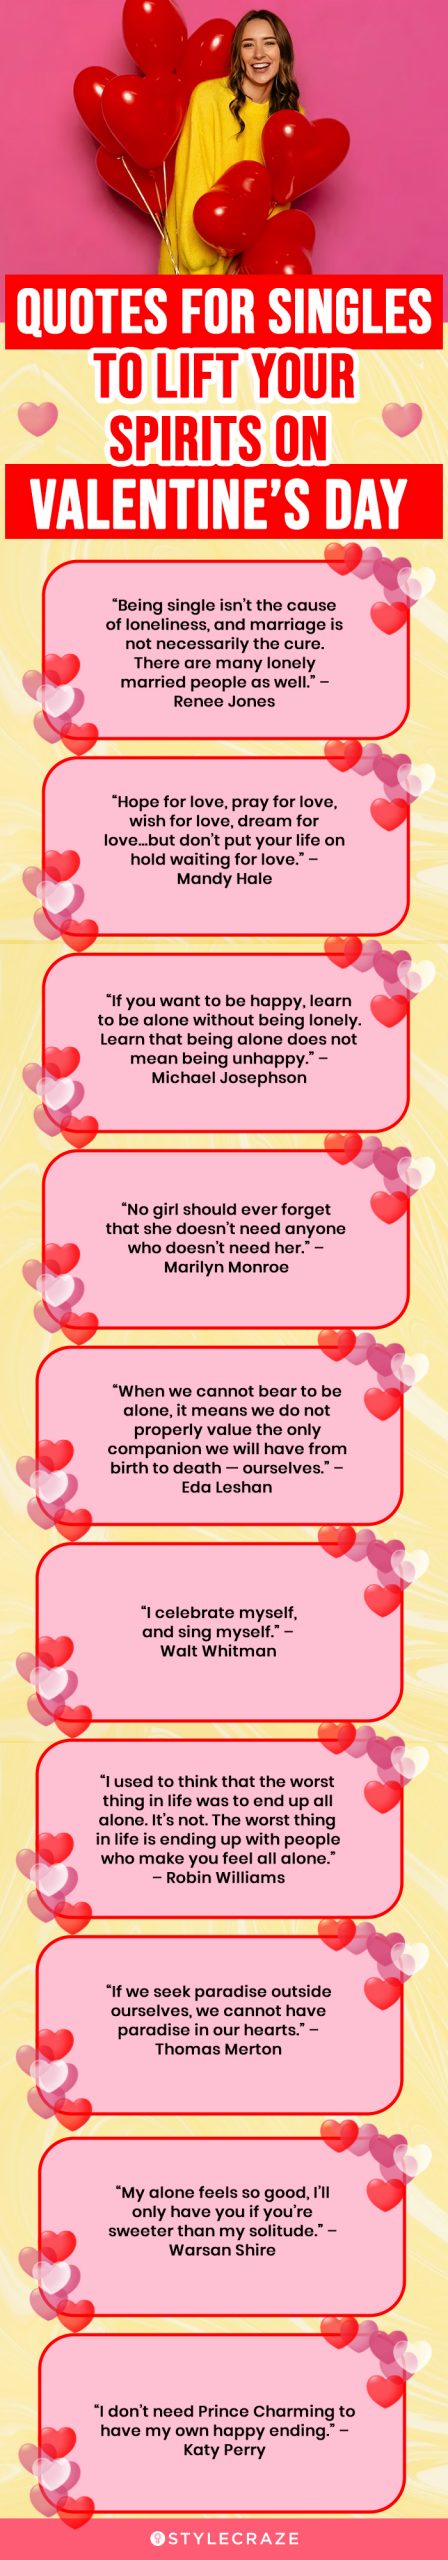 quotes for singles to lift your spirits on valentine’s day (infographic)